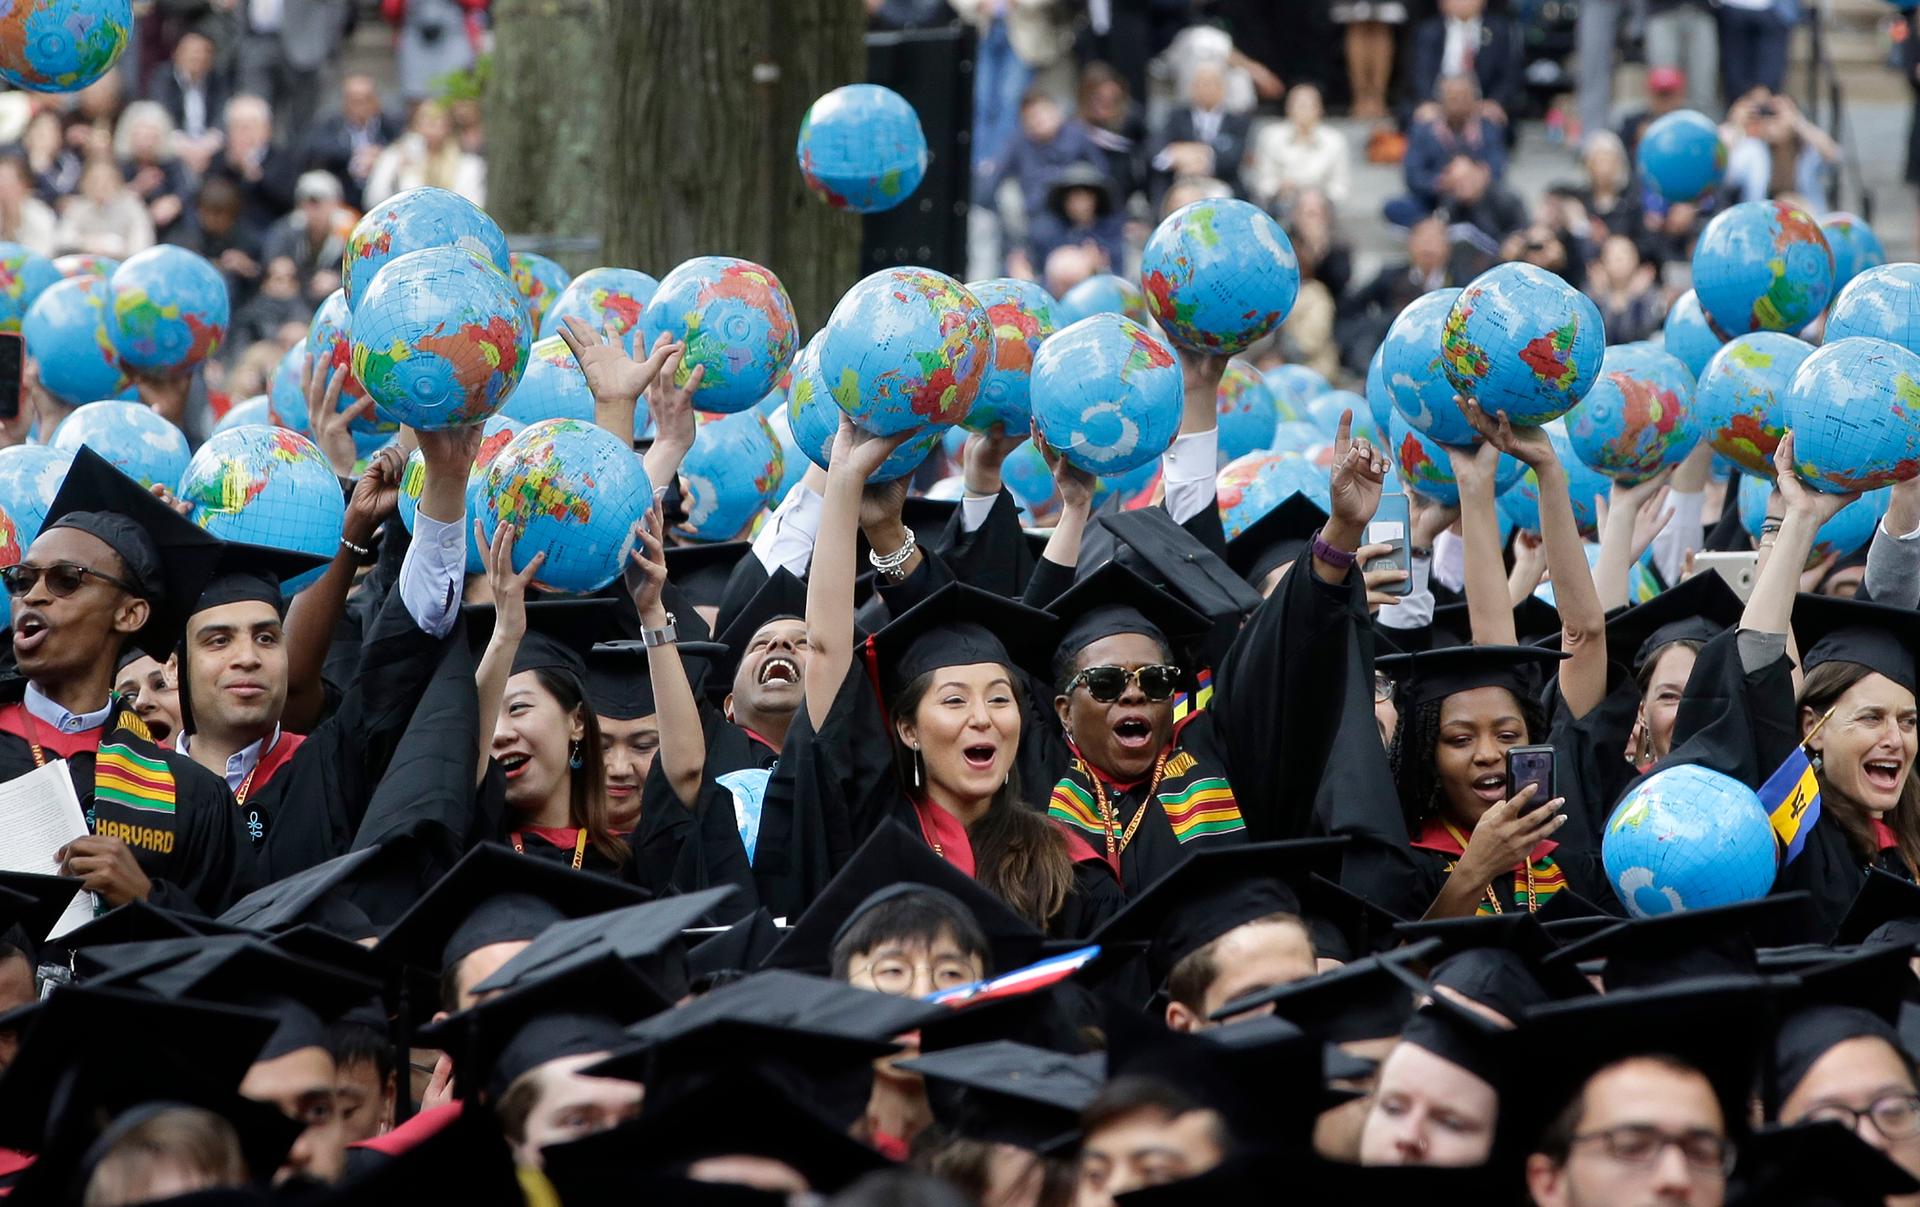 Graduates of Harvard's John F. Kennedy School of Government hold aloft inflatable globes as they celebrate graduating during Harvard University's commencement exercises, May 30, 2019, on the schools campus in Cambridge, Mass.